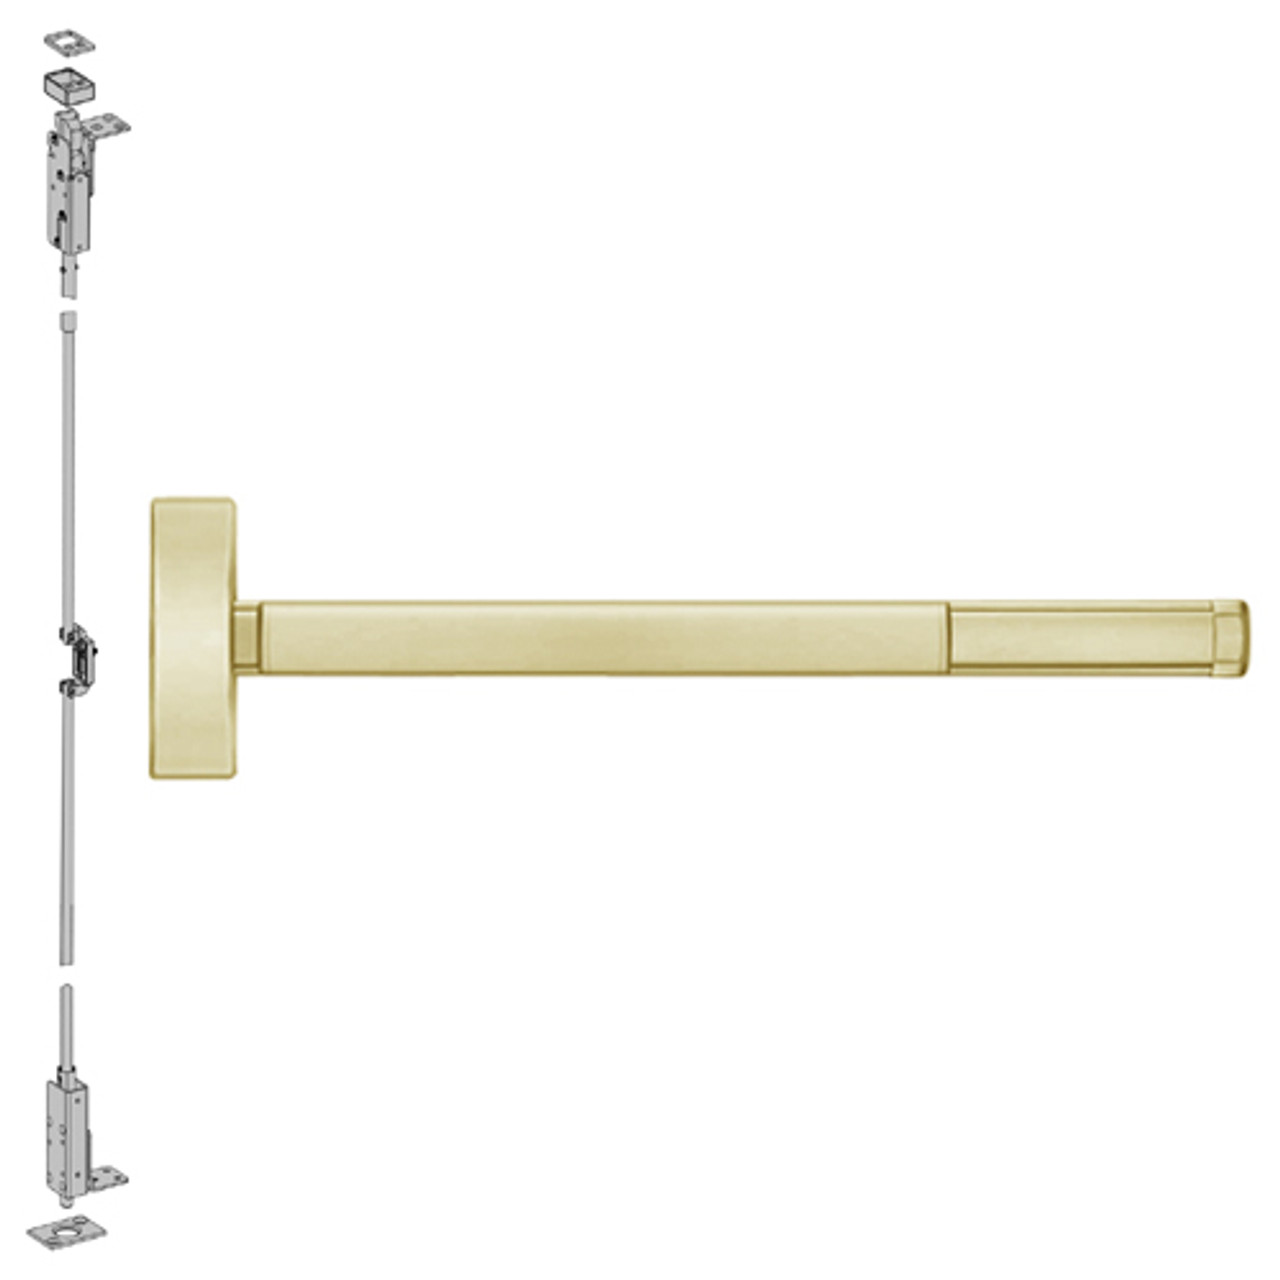 ELRFL2708-606-48 PHI 2700 Series Wood Door Concealed Vertical Exit Device with Electric Latch Retraction Prepped for Key Controls Lever-Knob in Satin Brass Finish